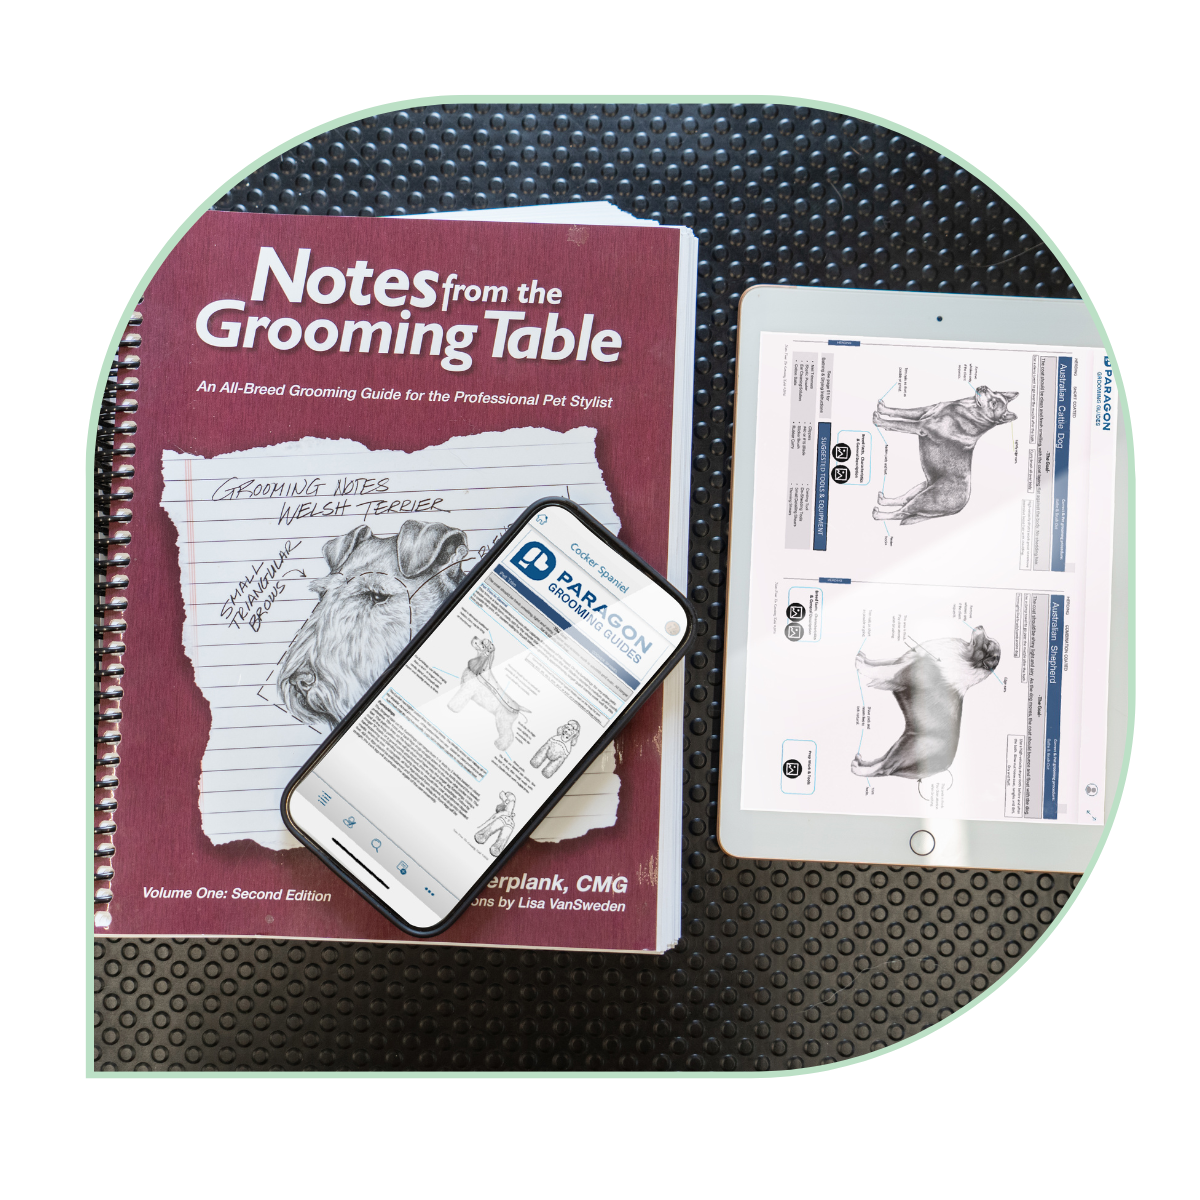 Notes from the Grooming Table book and Devices Inset